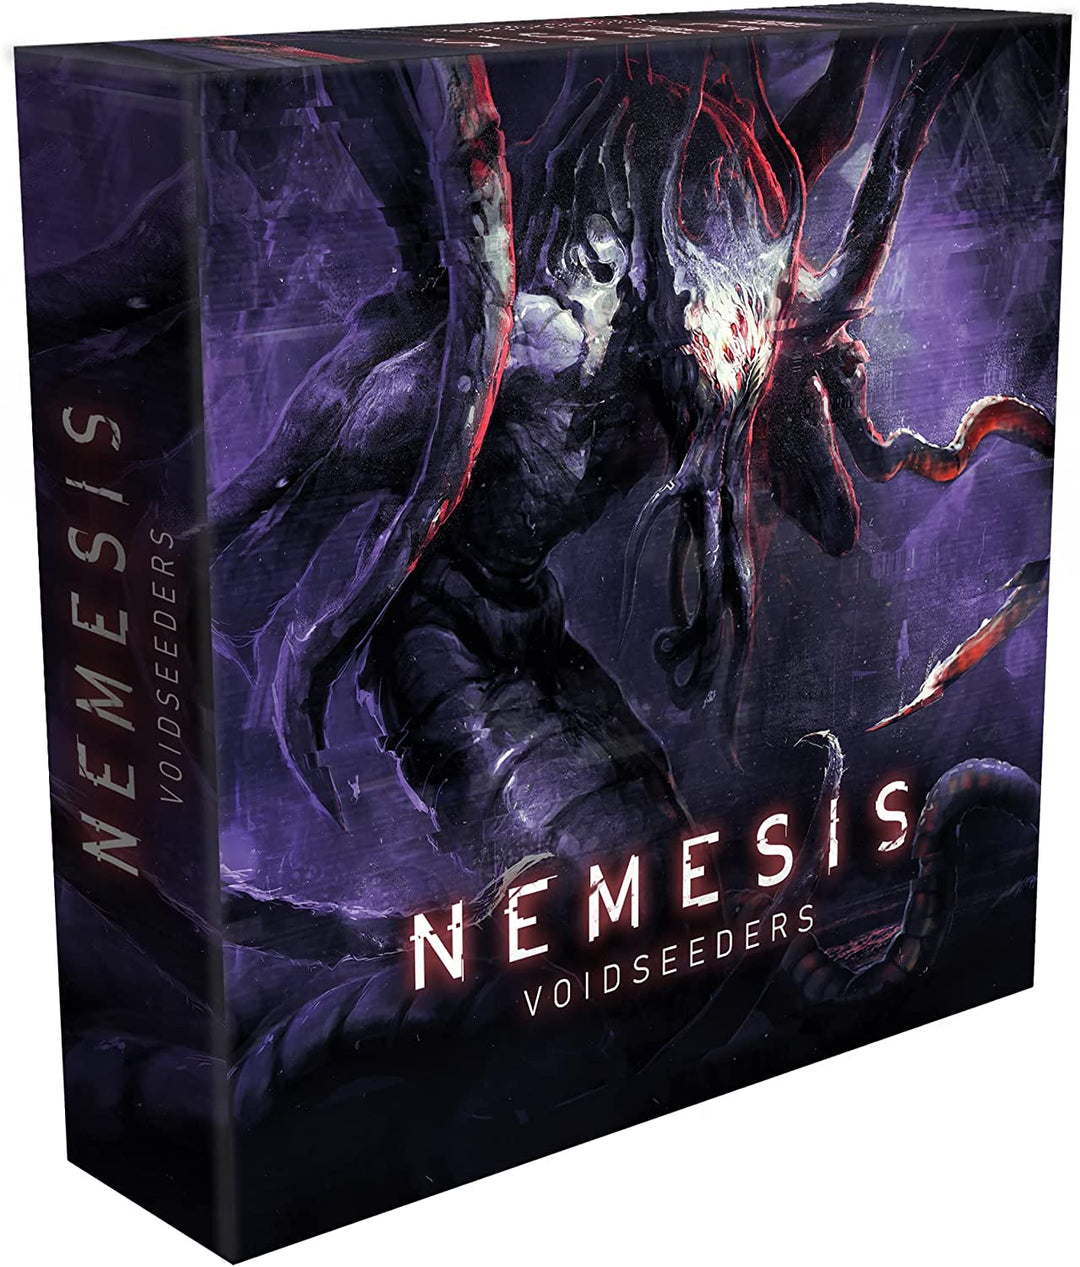 Awaken Realms | Voidseeders Expansion: Nemesis | Board Game | Ages 12+